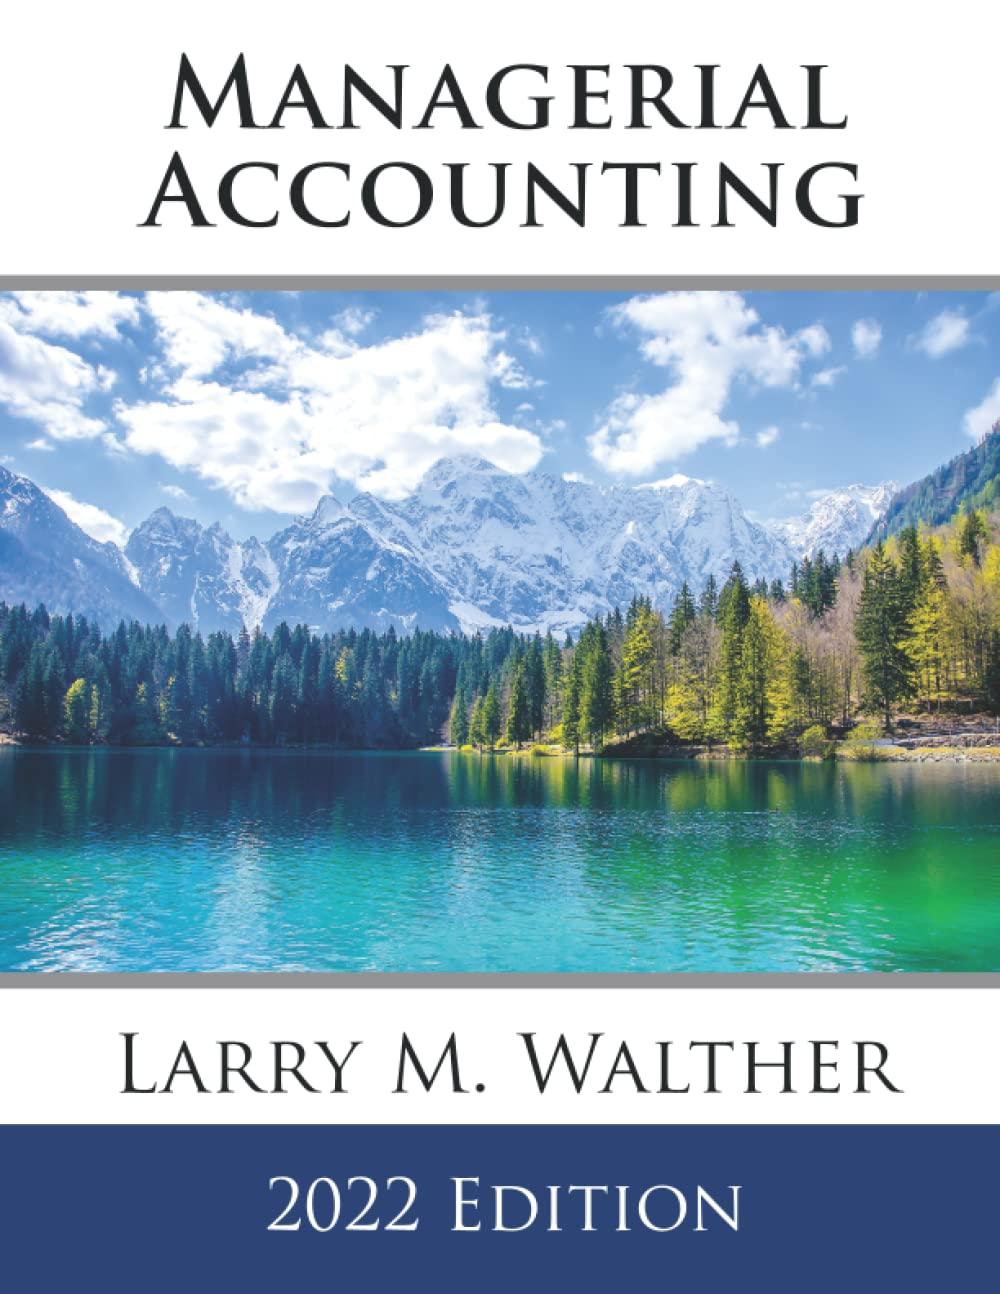 managerial accounting 2022nd edition larry m. walther 8409037918, 979-8409037918